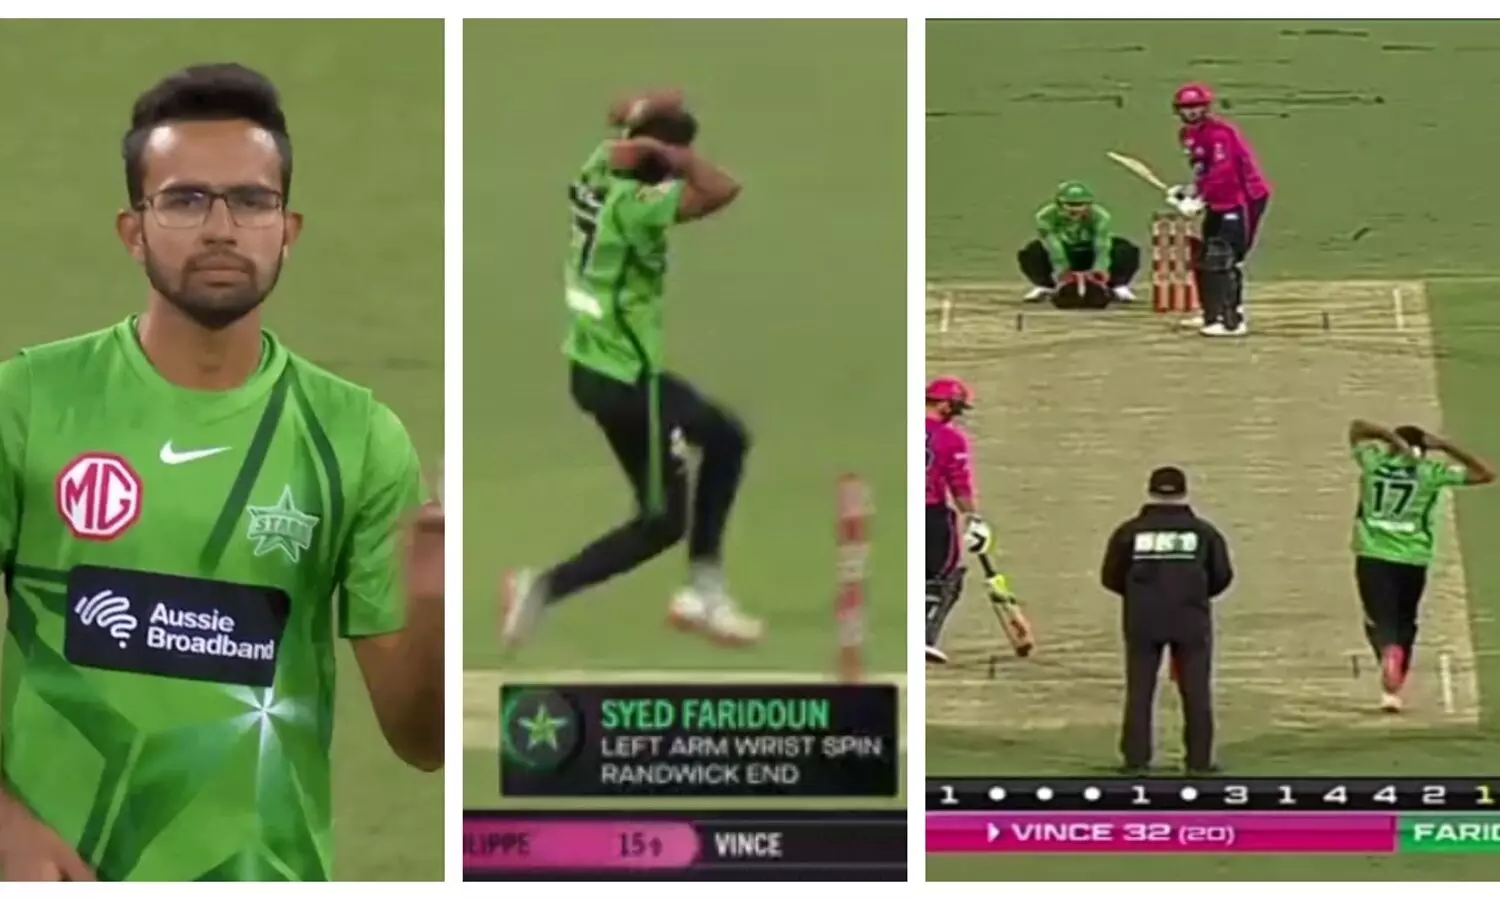 Syed Faridouns unique bowling action takes BBL by storm Watch